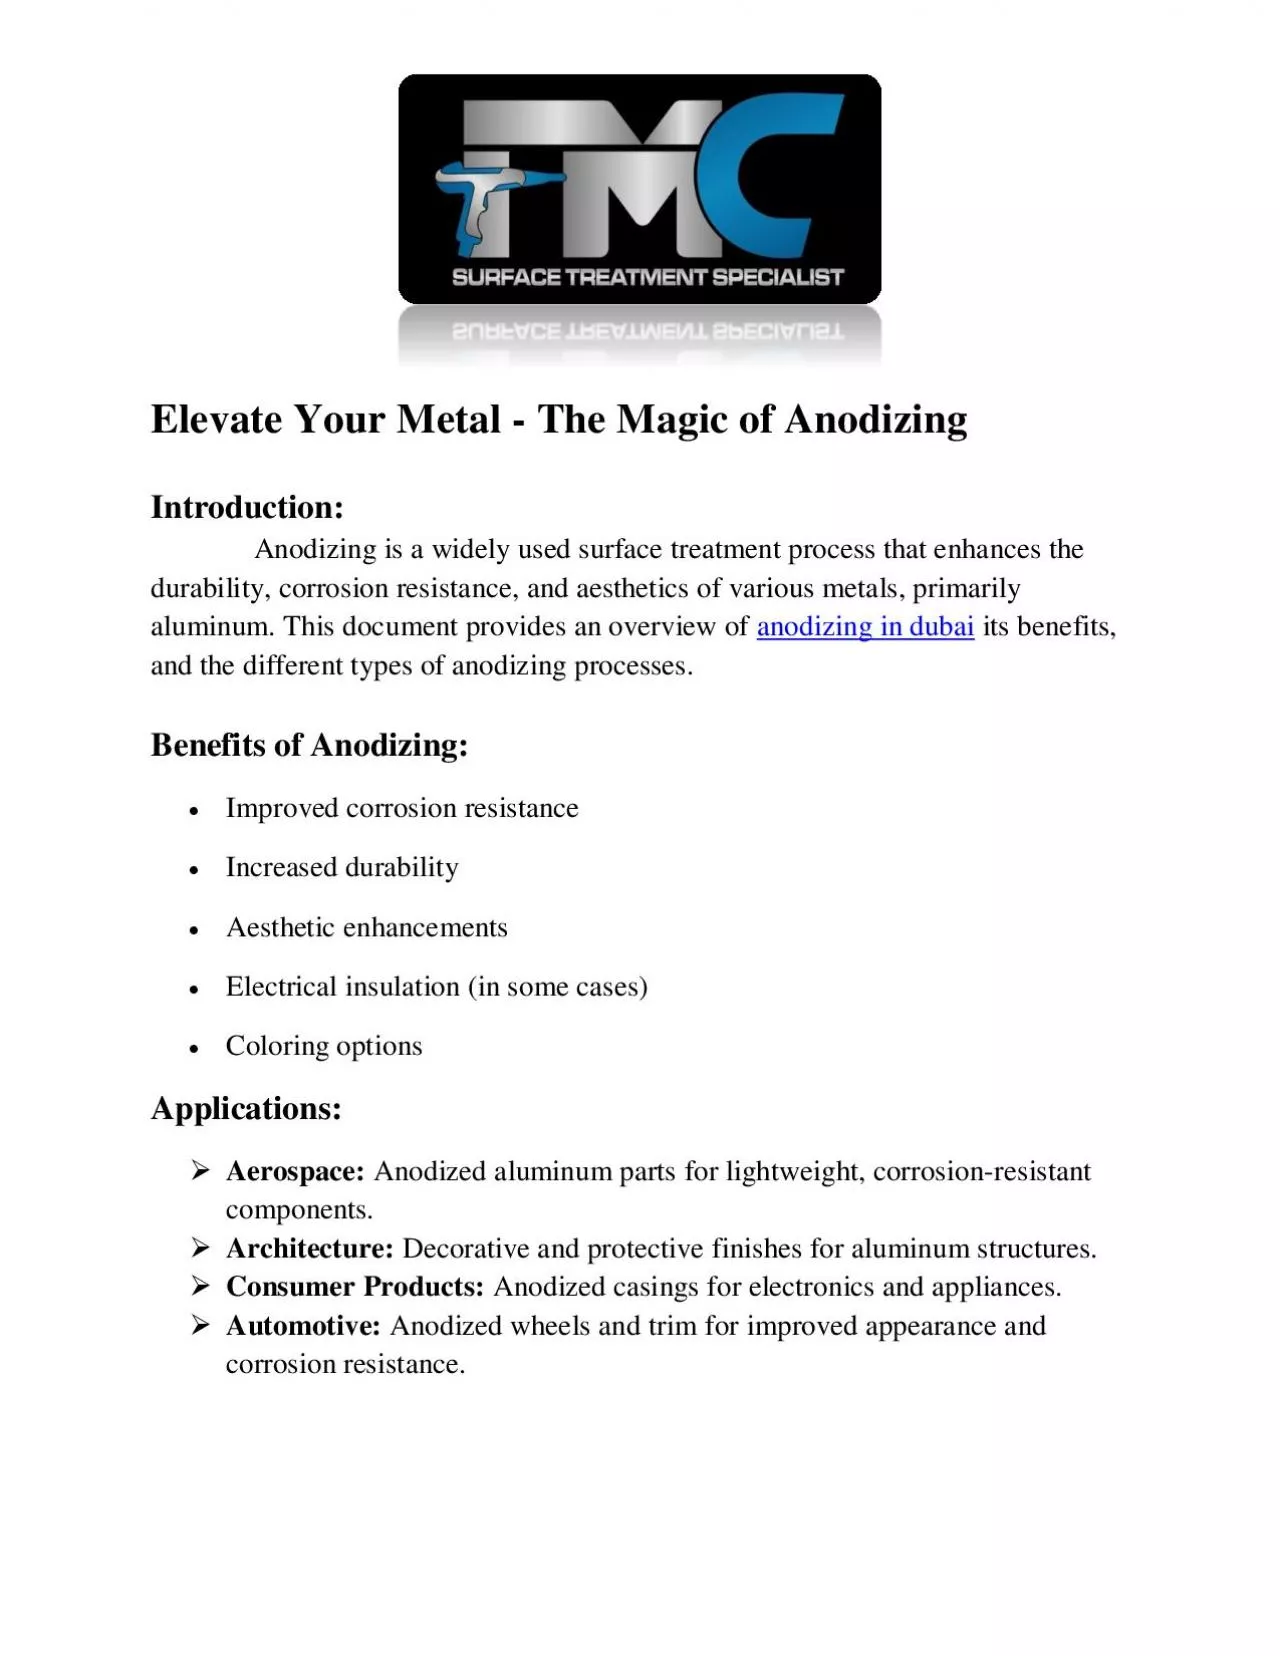 Elevate Your Metal - The Magic of Anodizing